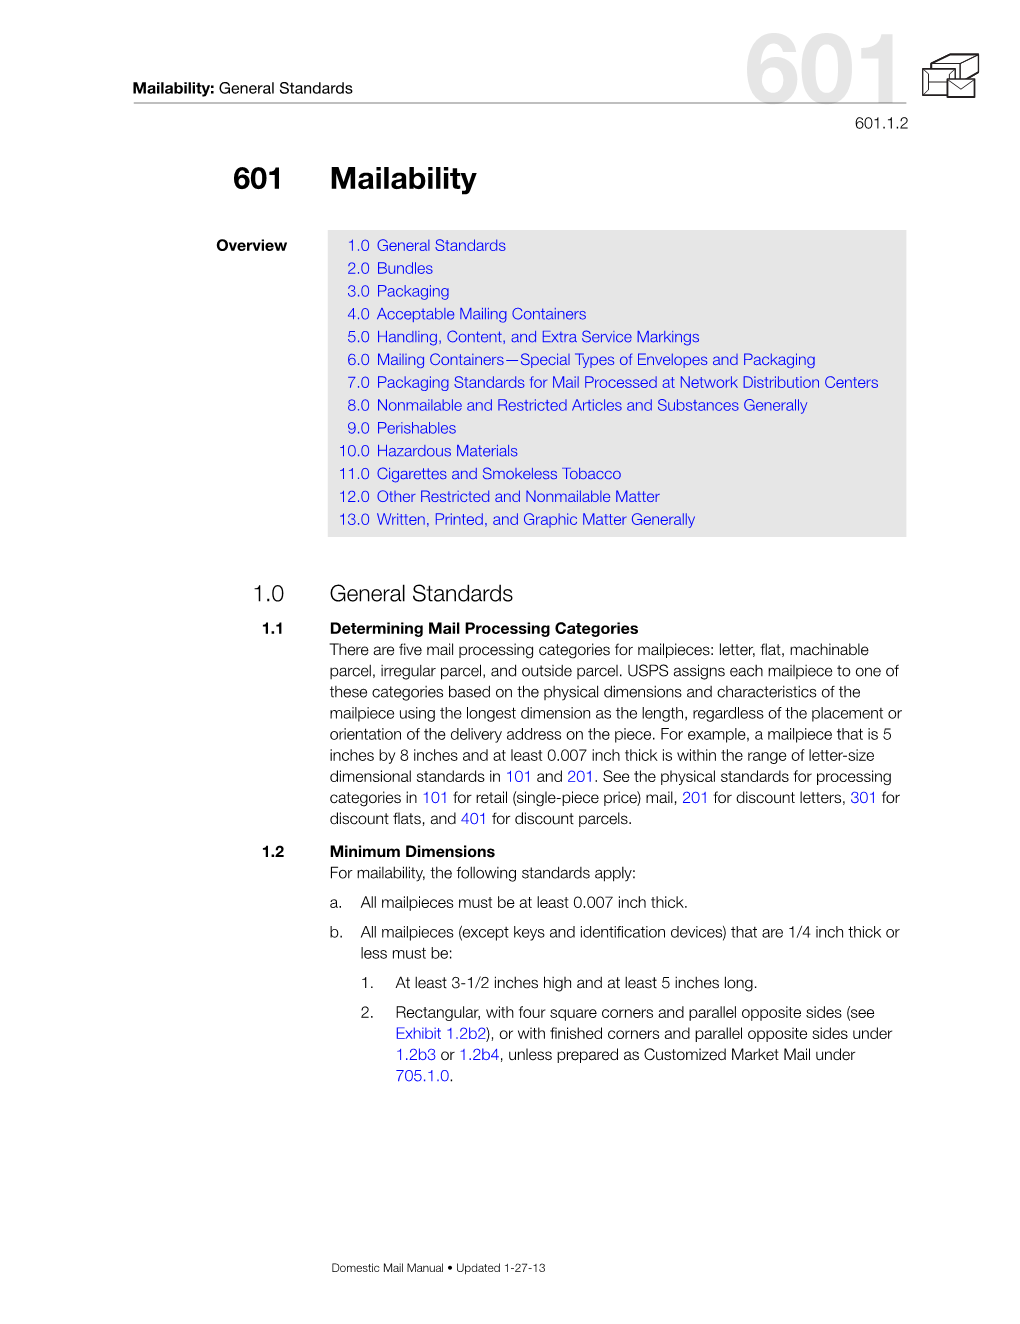 DMM 601 Mailability Standards